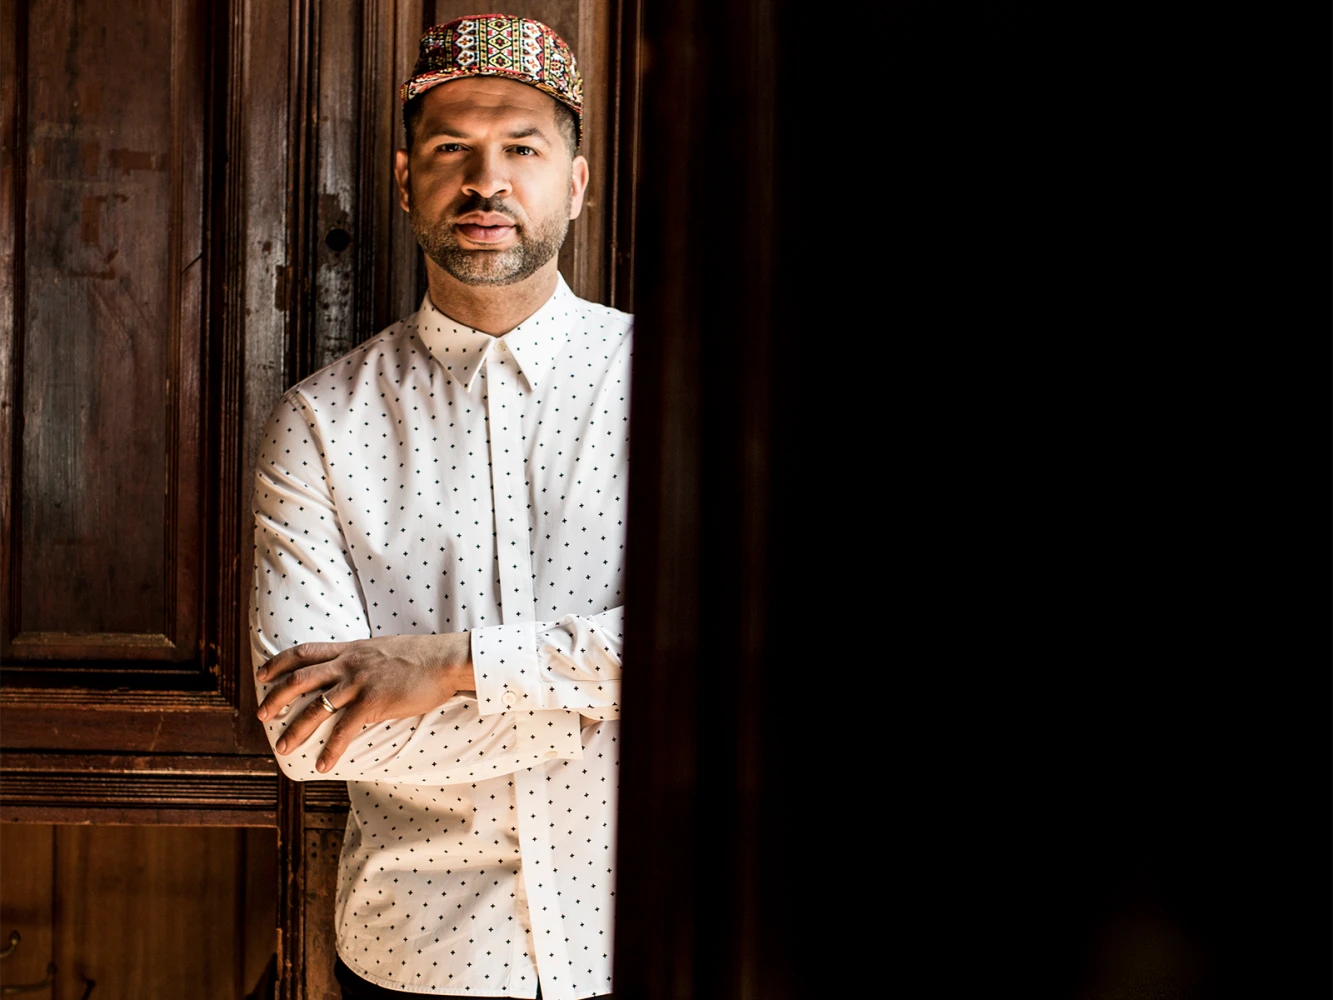 Celebrity Series presents Jason Moran and the Harlem Hellfighters: What to expect - 2